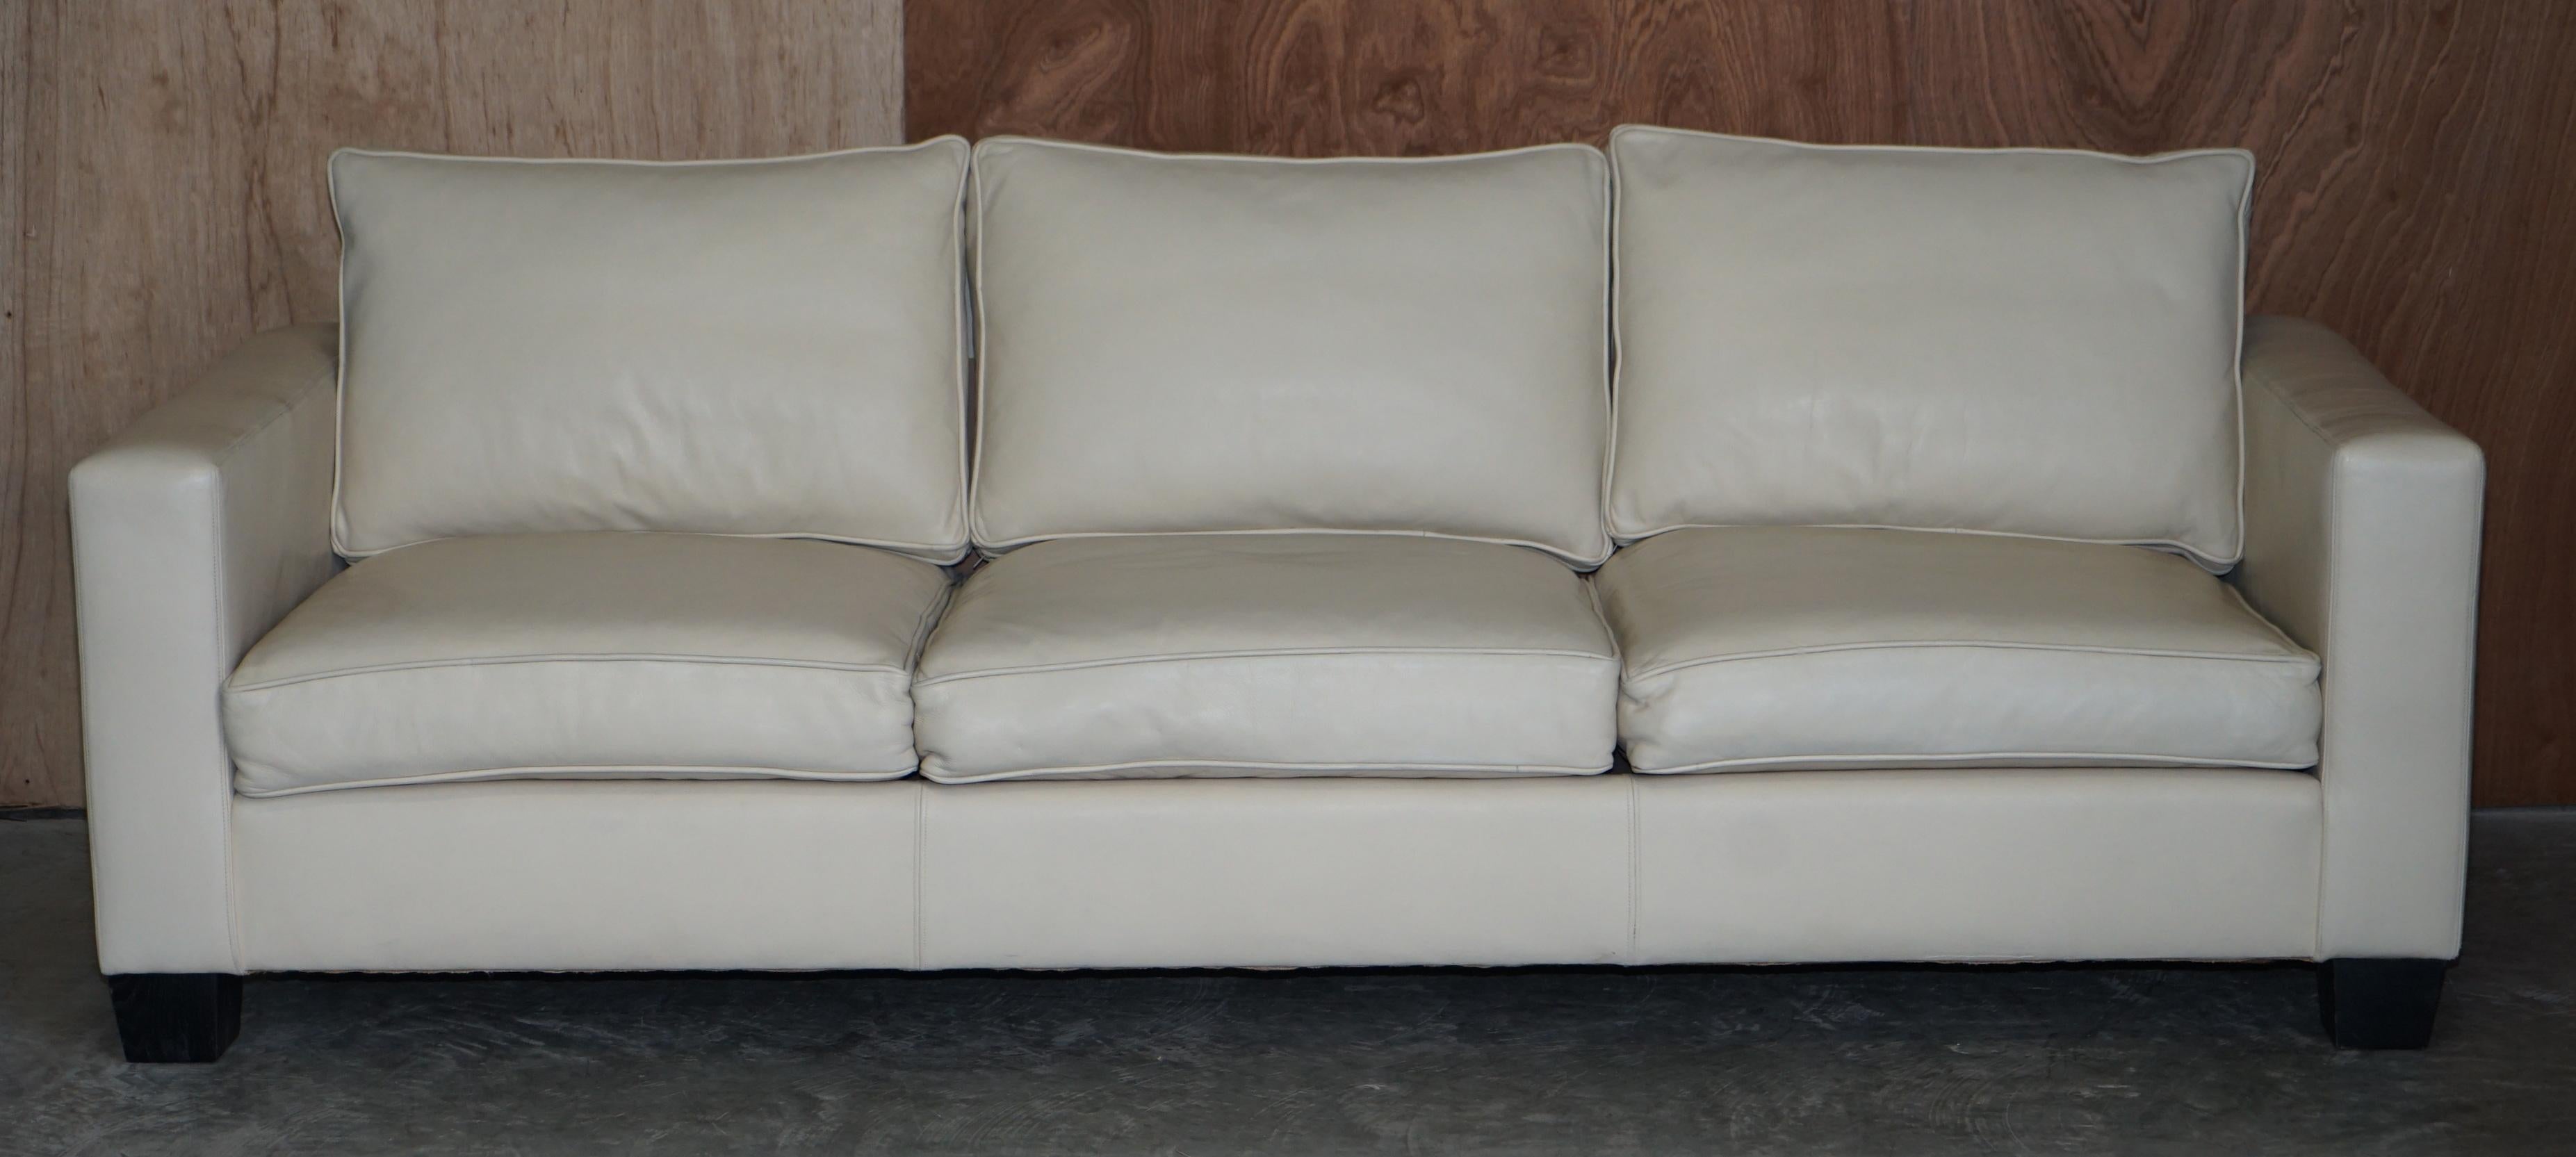 We are delighted to offer for sale this very rare RRP £15,000 custom made to order fully labelled Ralph Lauren Graham cream leather sofa in fully restored condition with feather filled cushions.

Where to begin! If you like quality seating, then